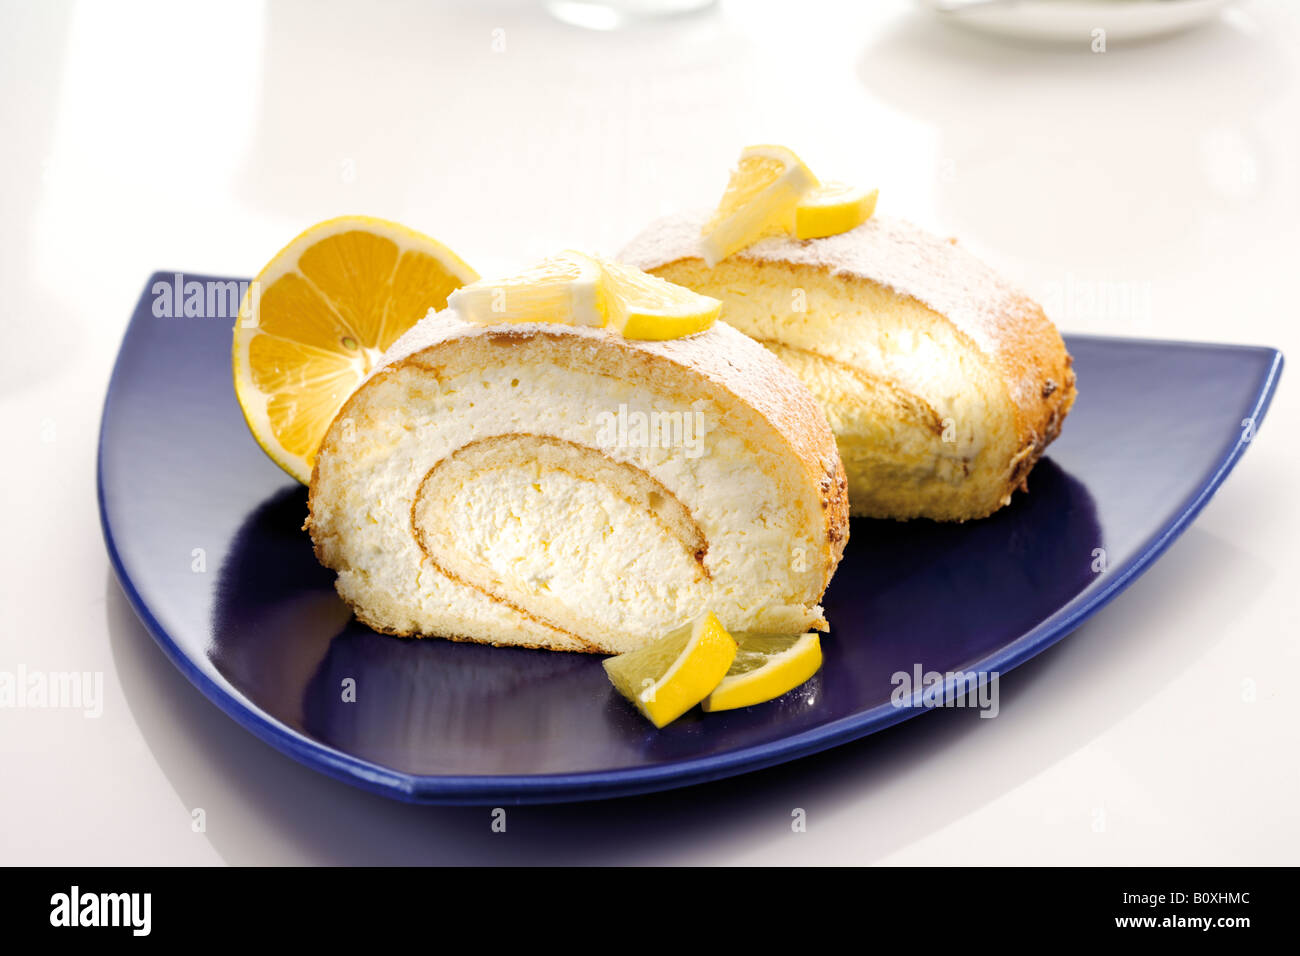 Swiss roll filled with lemon cream Stock Photo